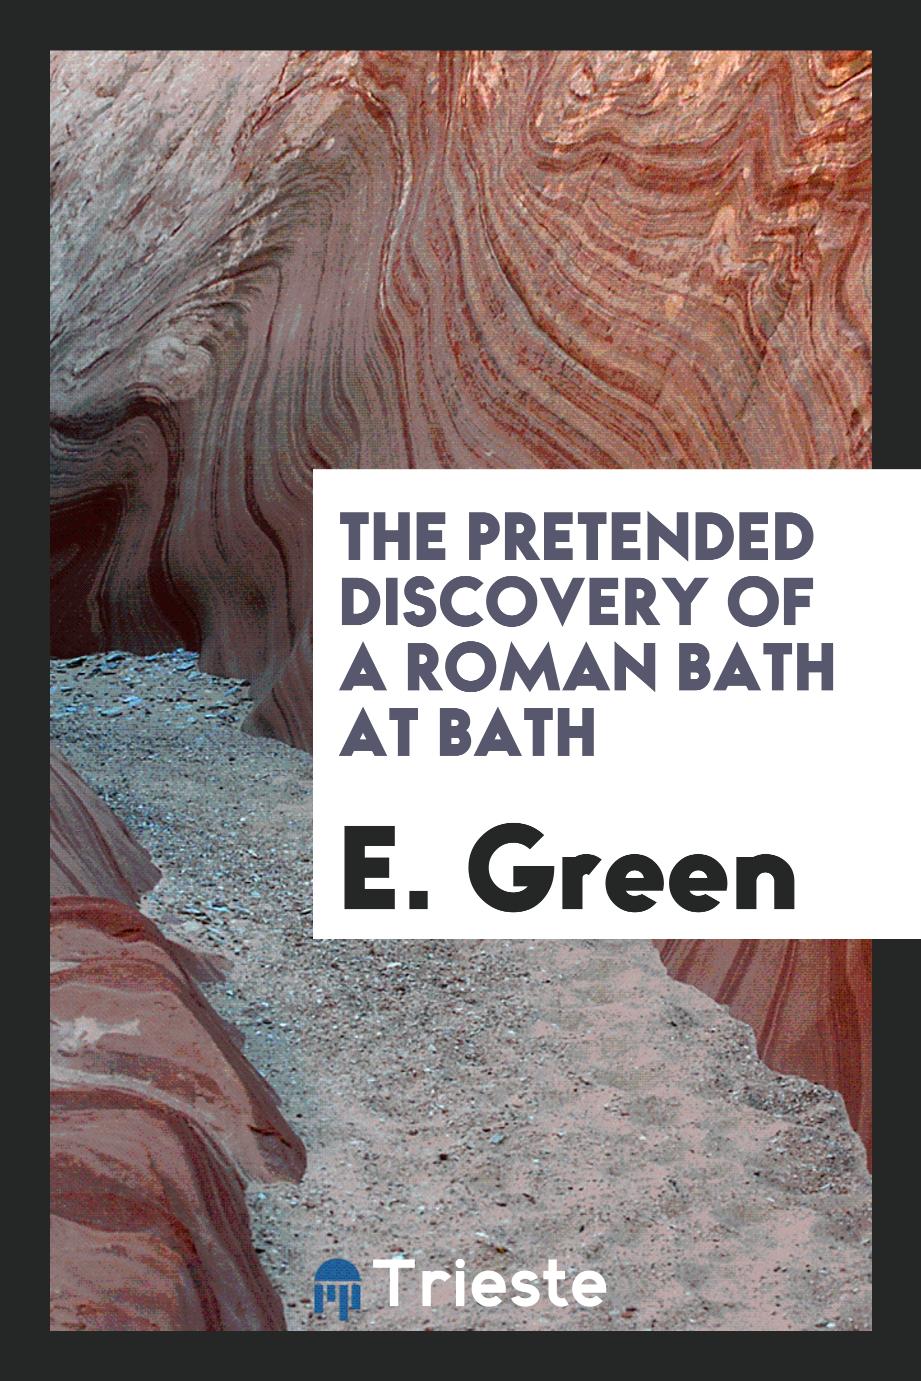 The pretended discovery of a Roman bath at Bath